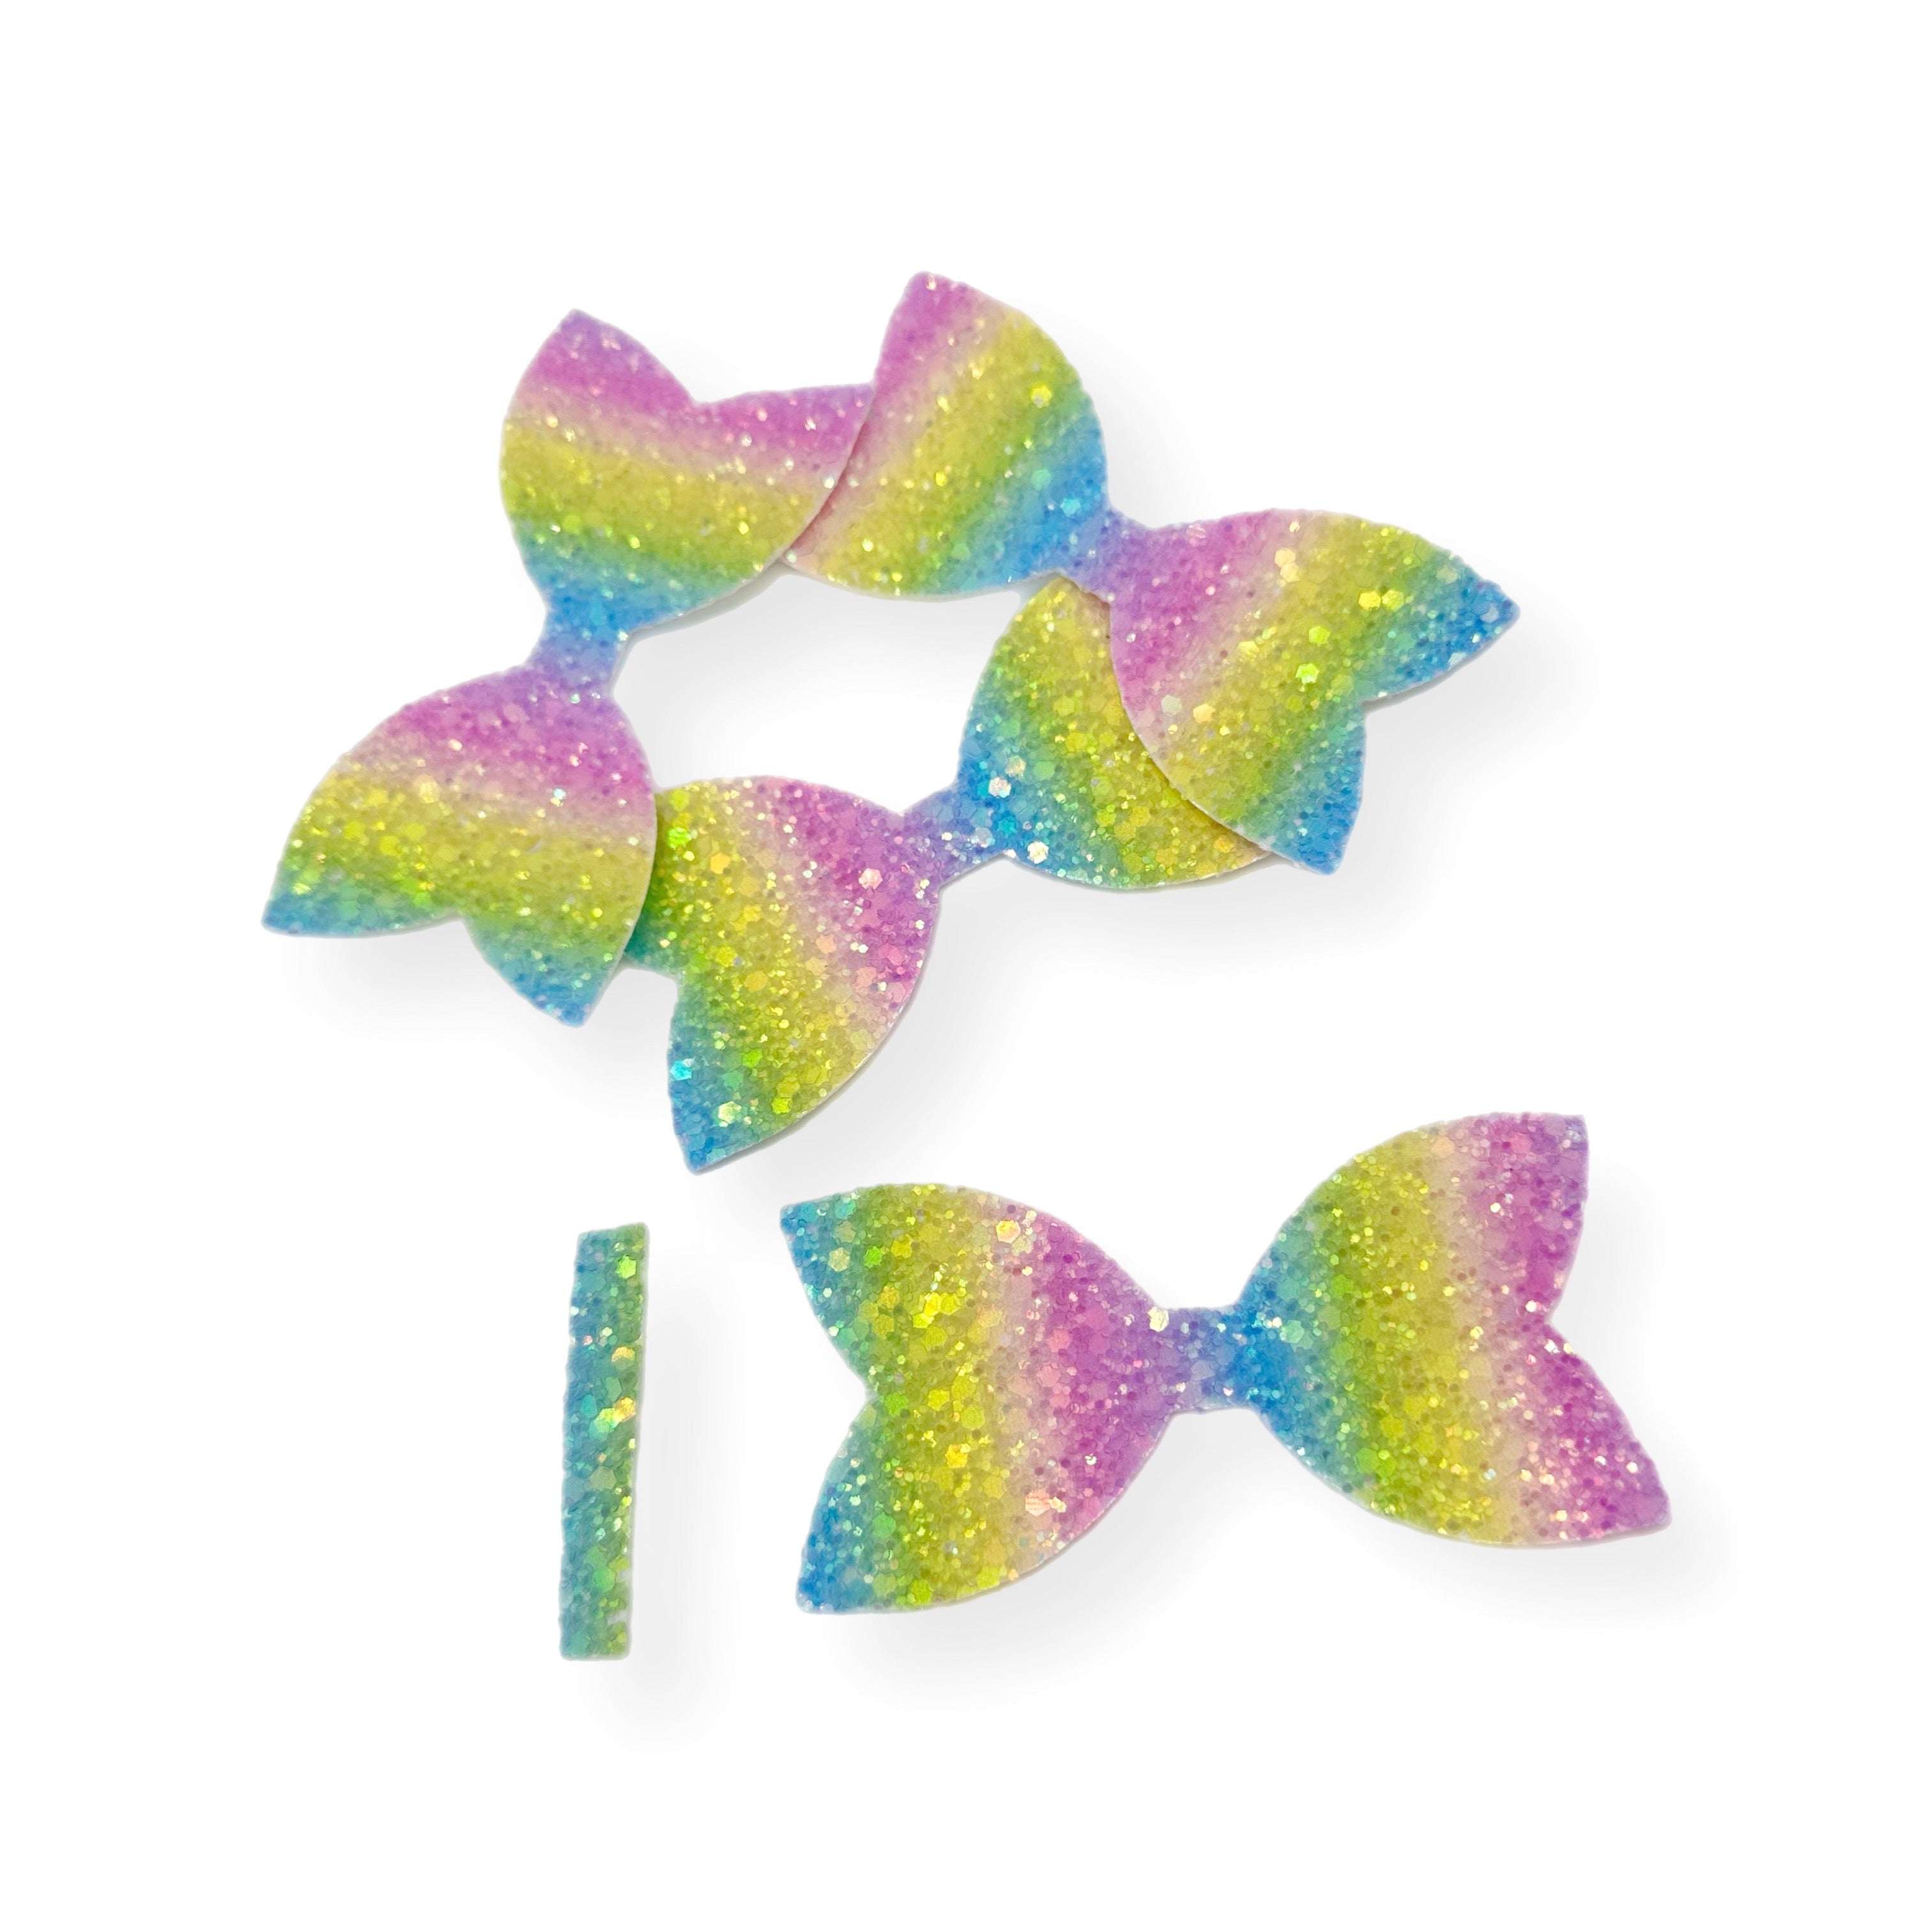 Pastel Rainbow Pre Cut Chunky Glitter Bow Tails & Centres 3.5”- 4 Pack